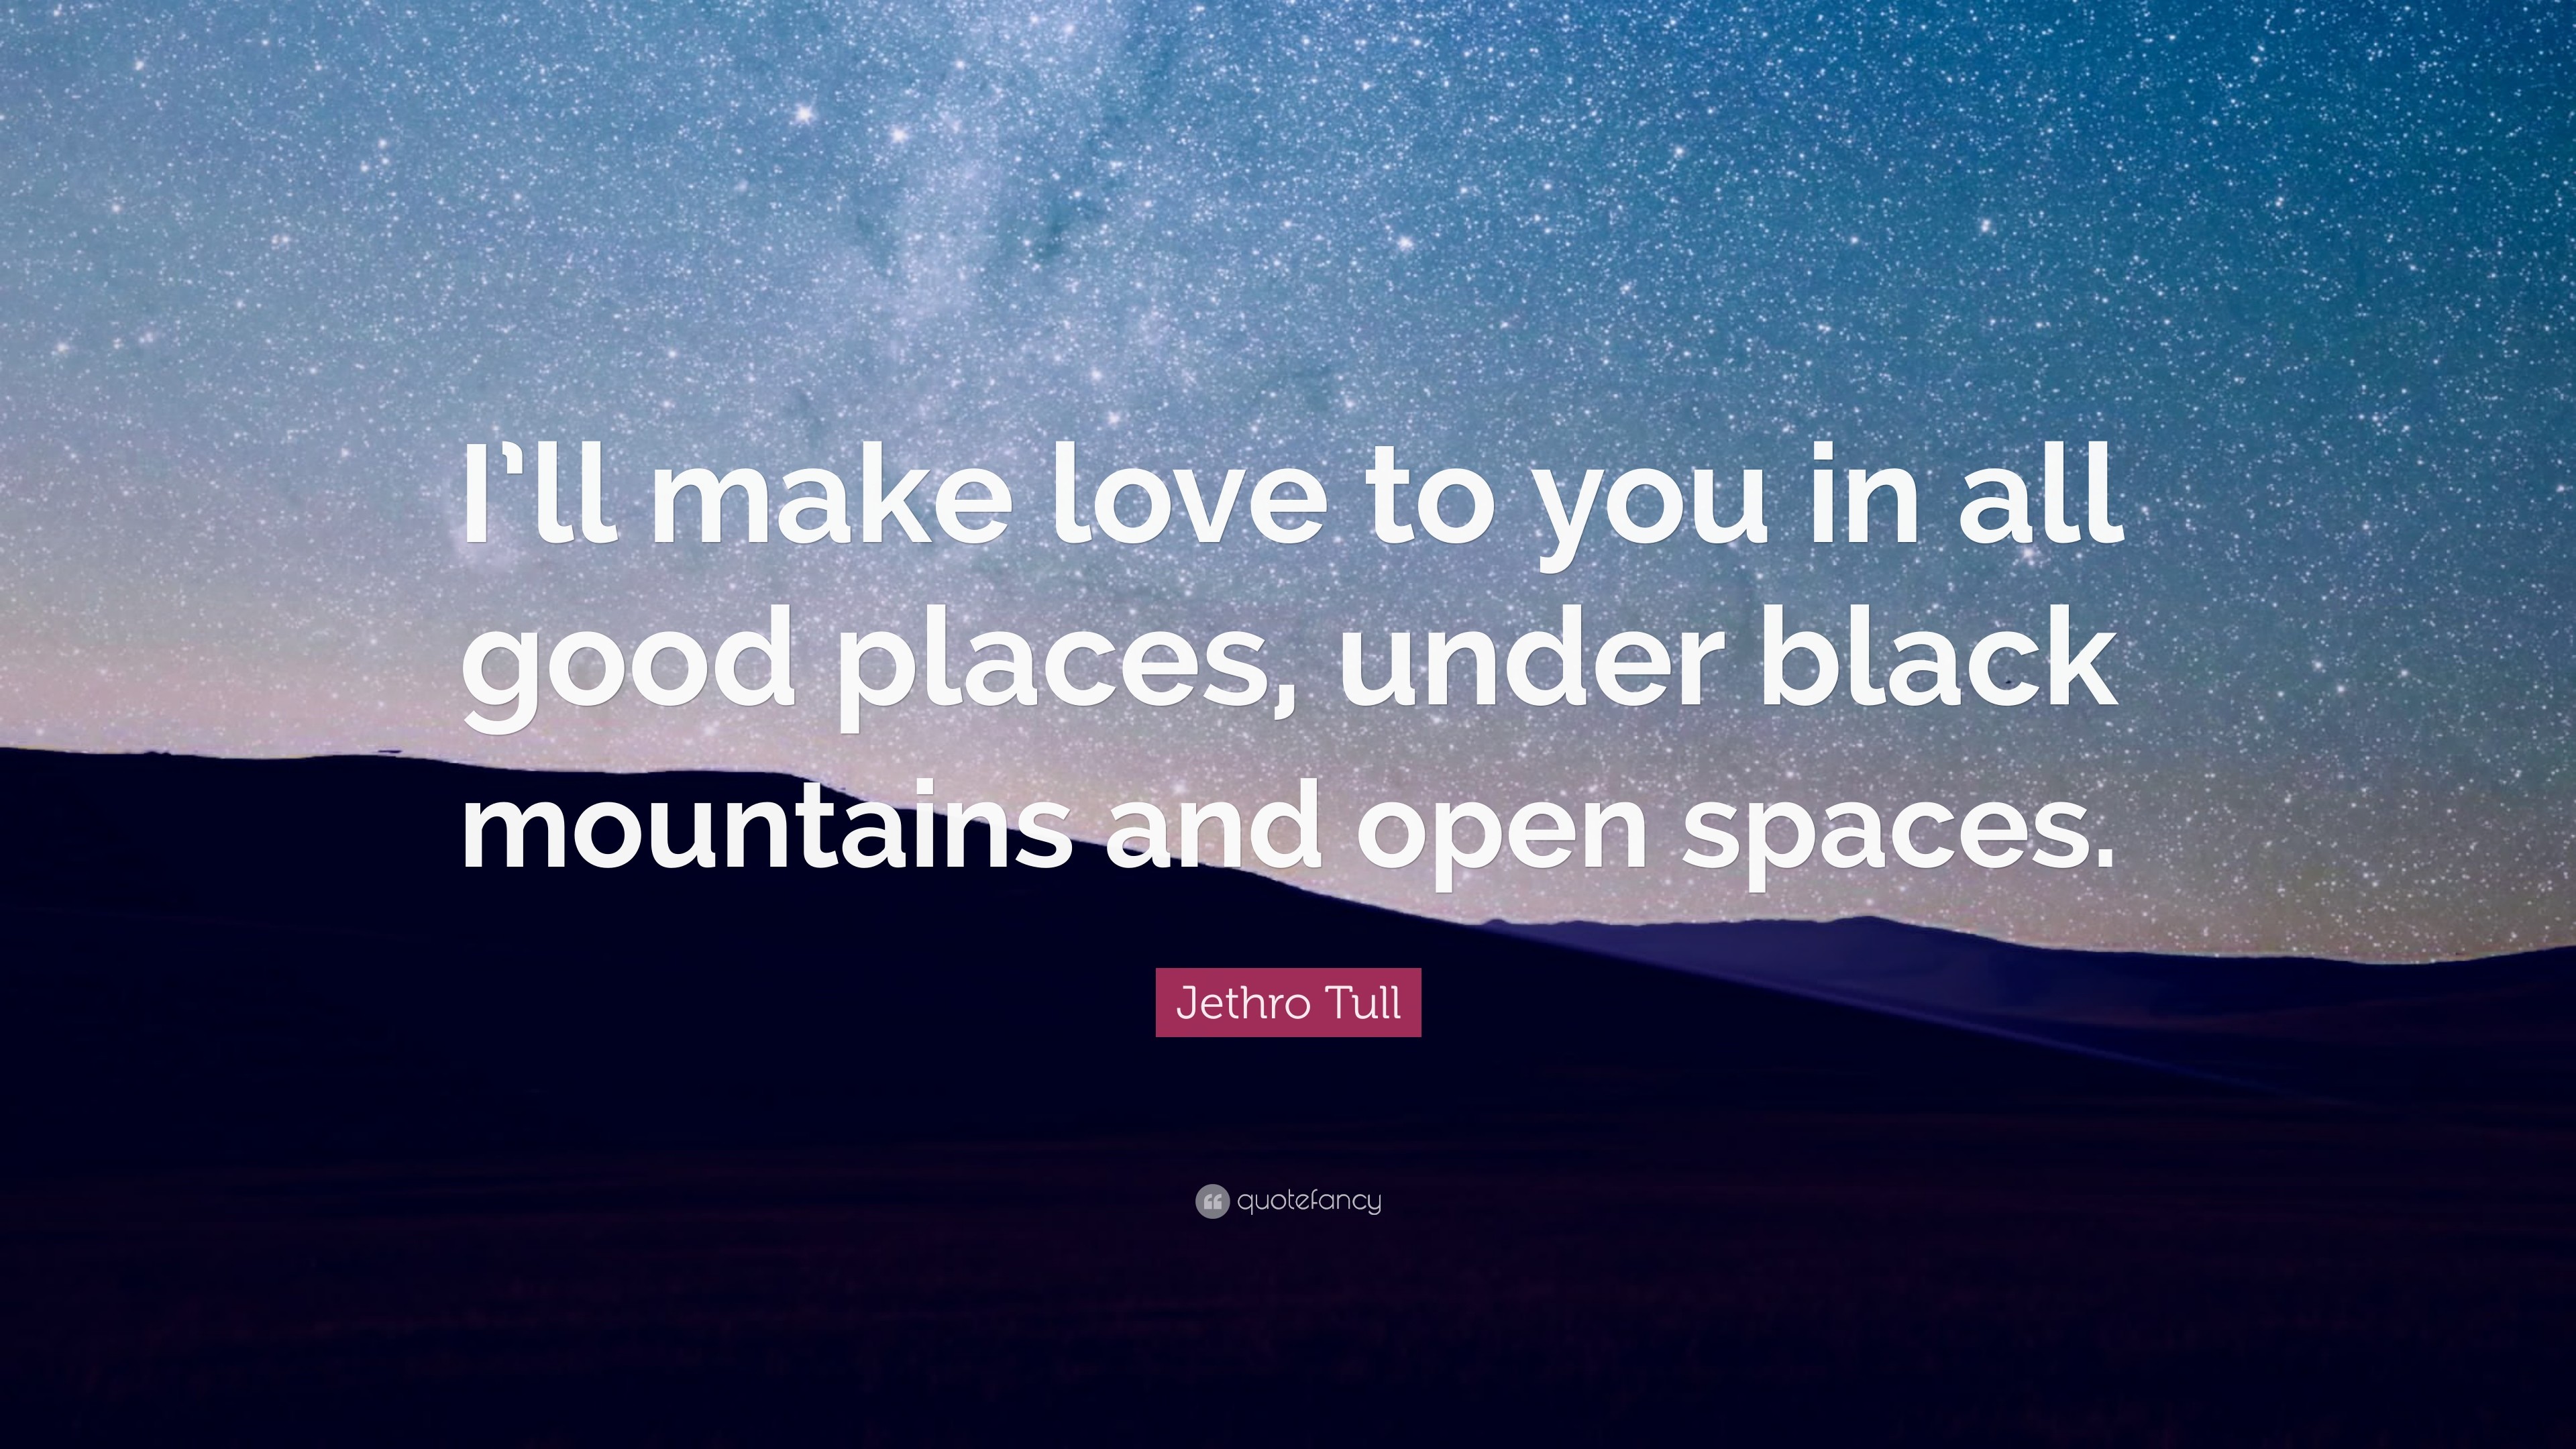 3840x2160 Jethro Tull Quote: “I'll make love to you in all good places